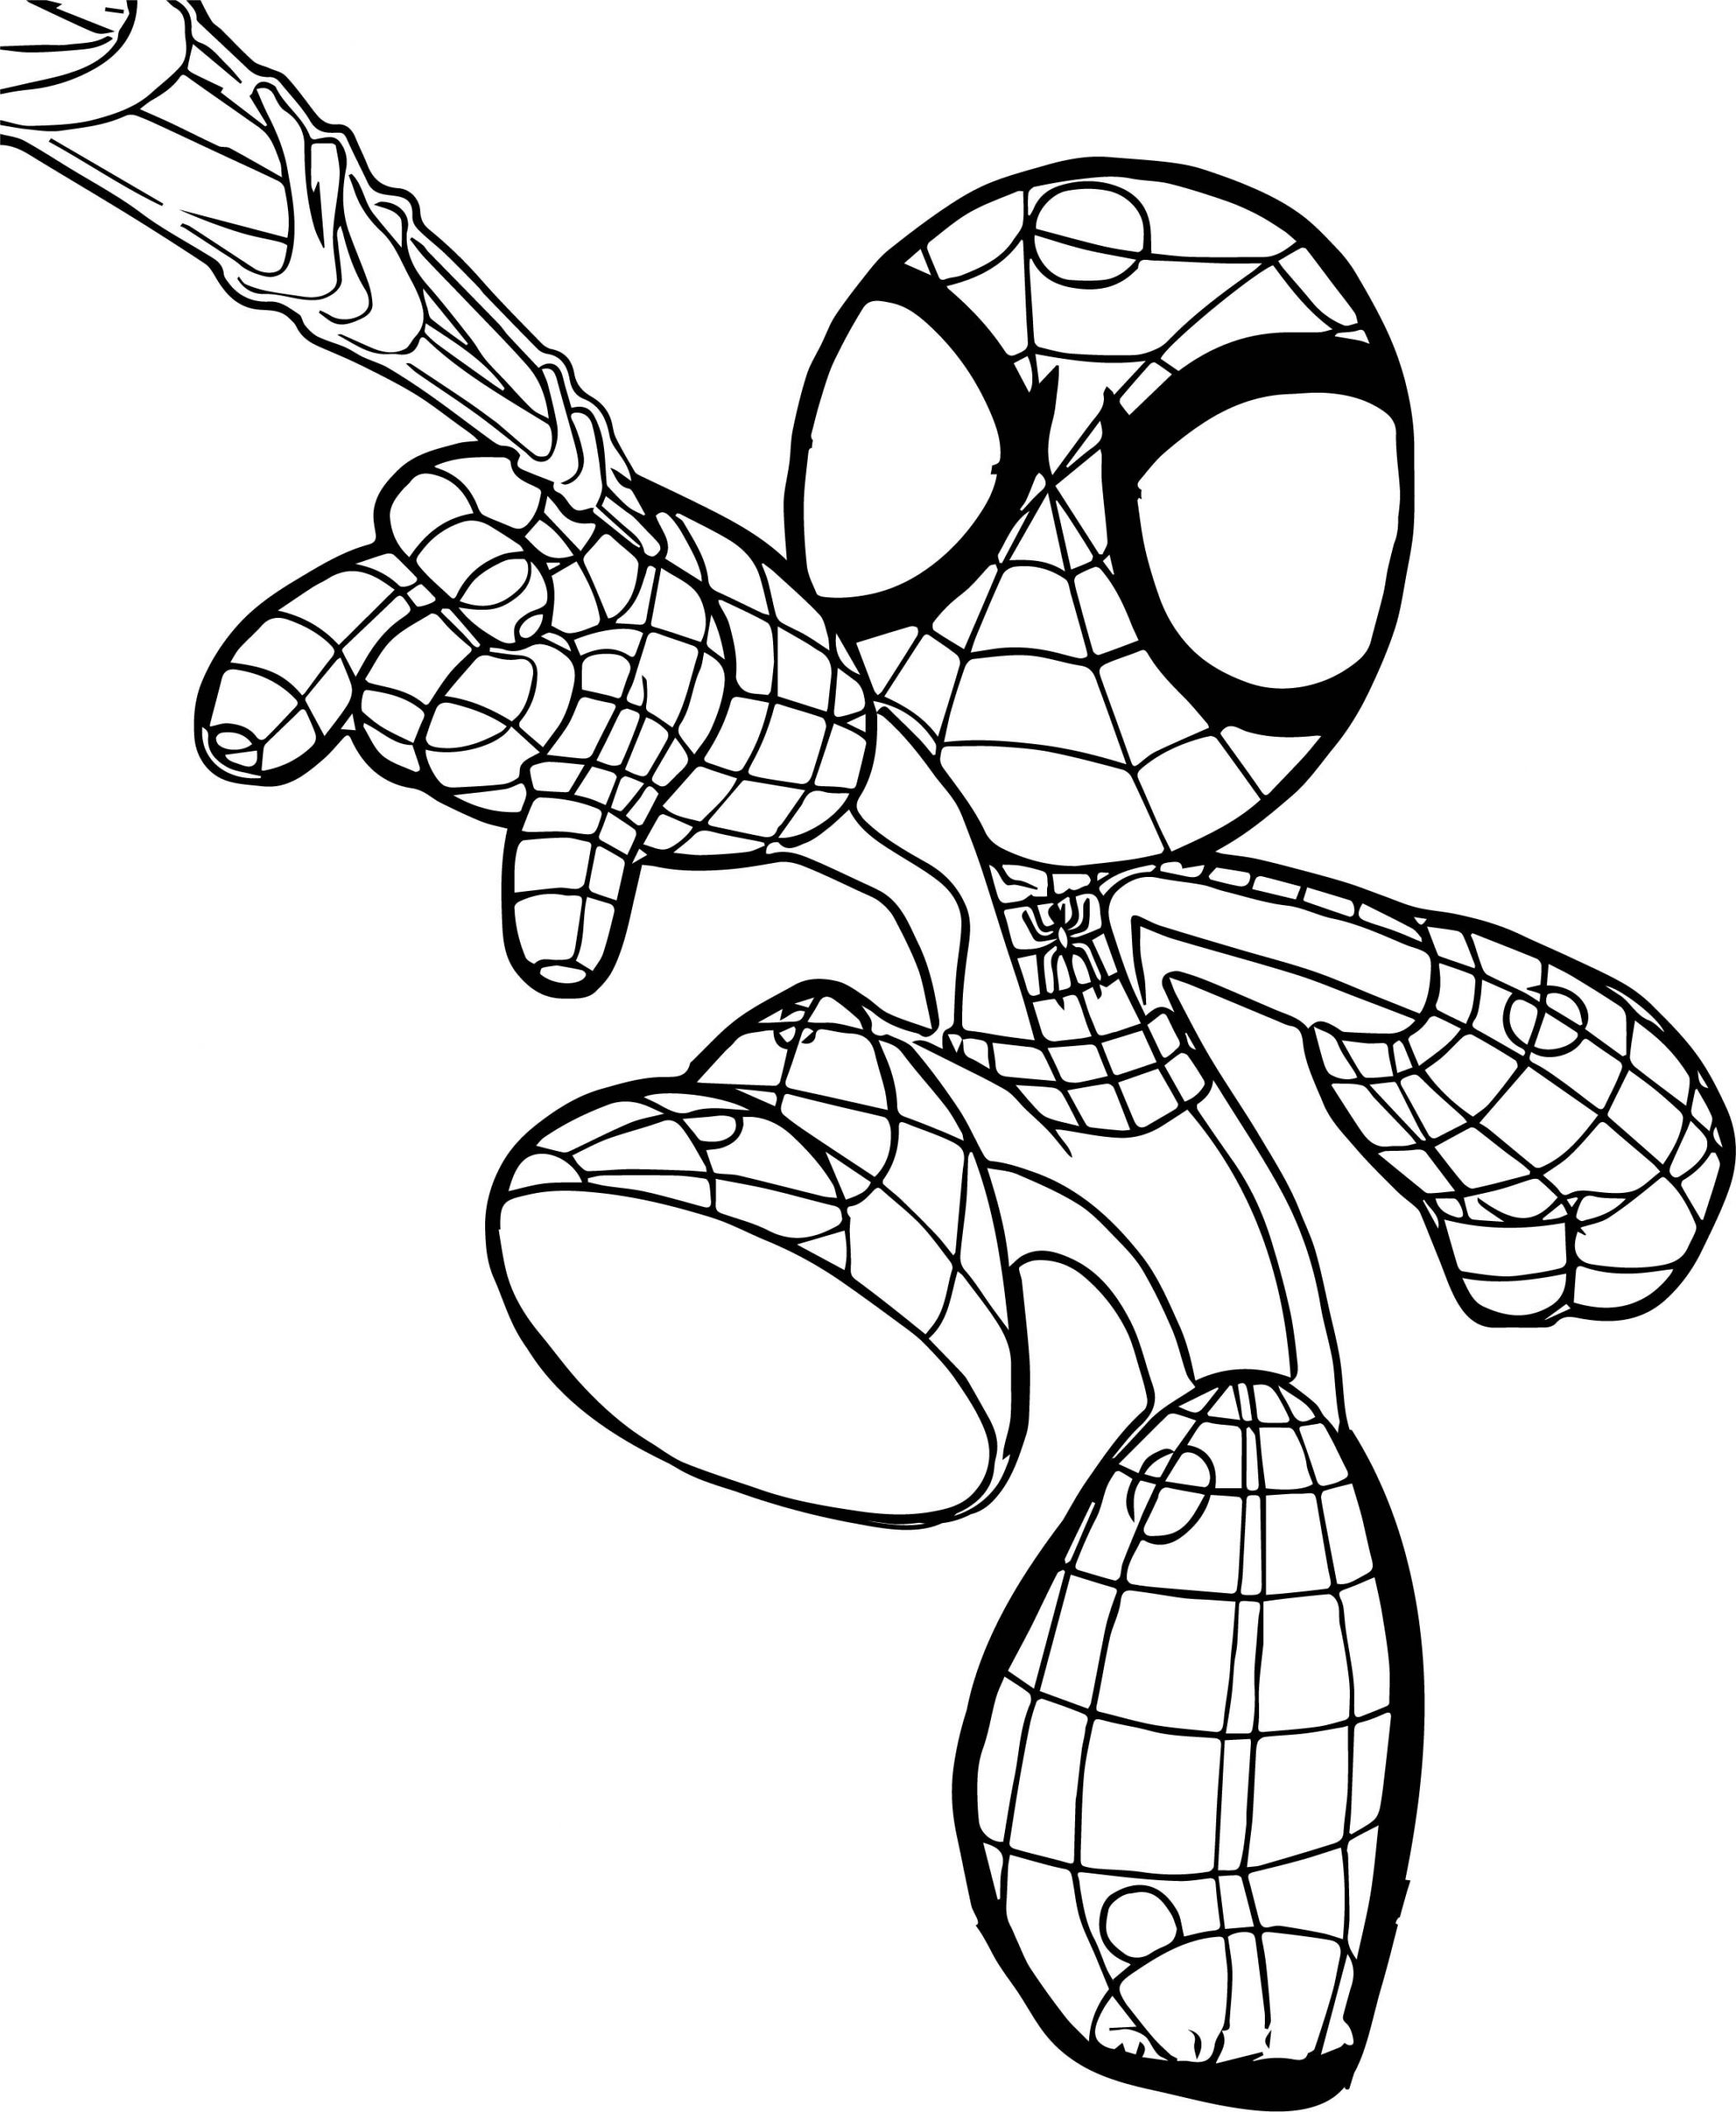 Spiderman Pictures To Color Samuelinfirmier